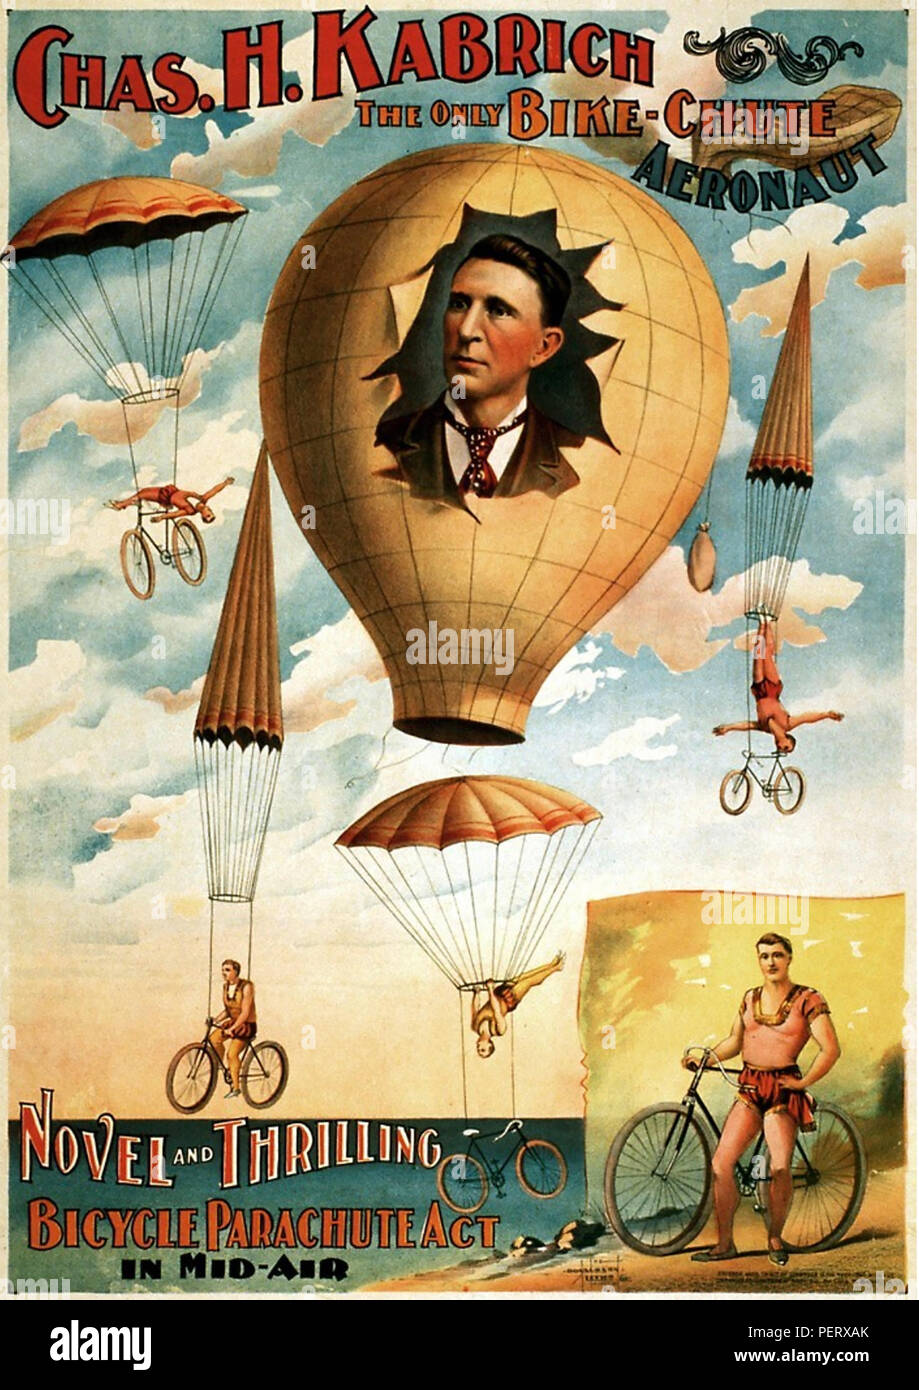 CHARLES KABRICH An American 1896 poster for a stunt bike rider and parachutist. No other information found. Stock Photo